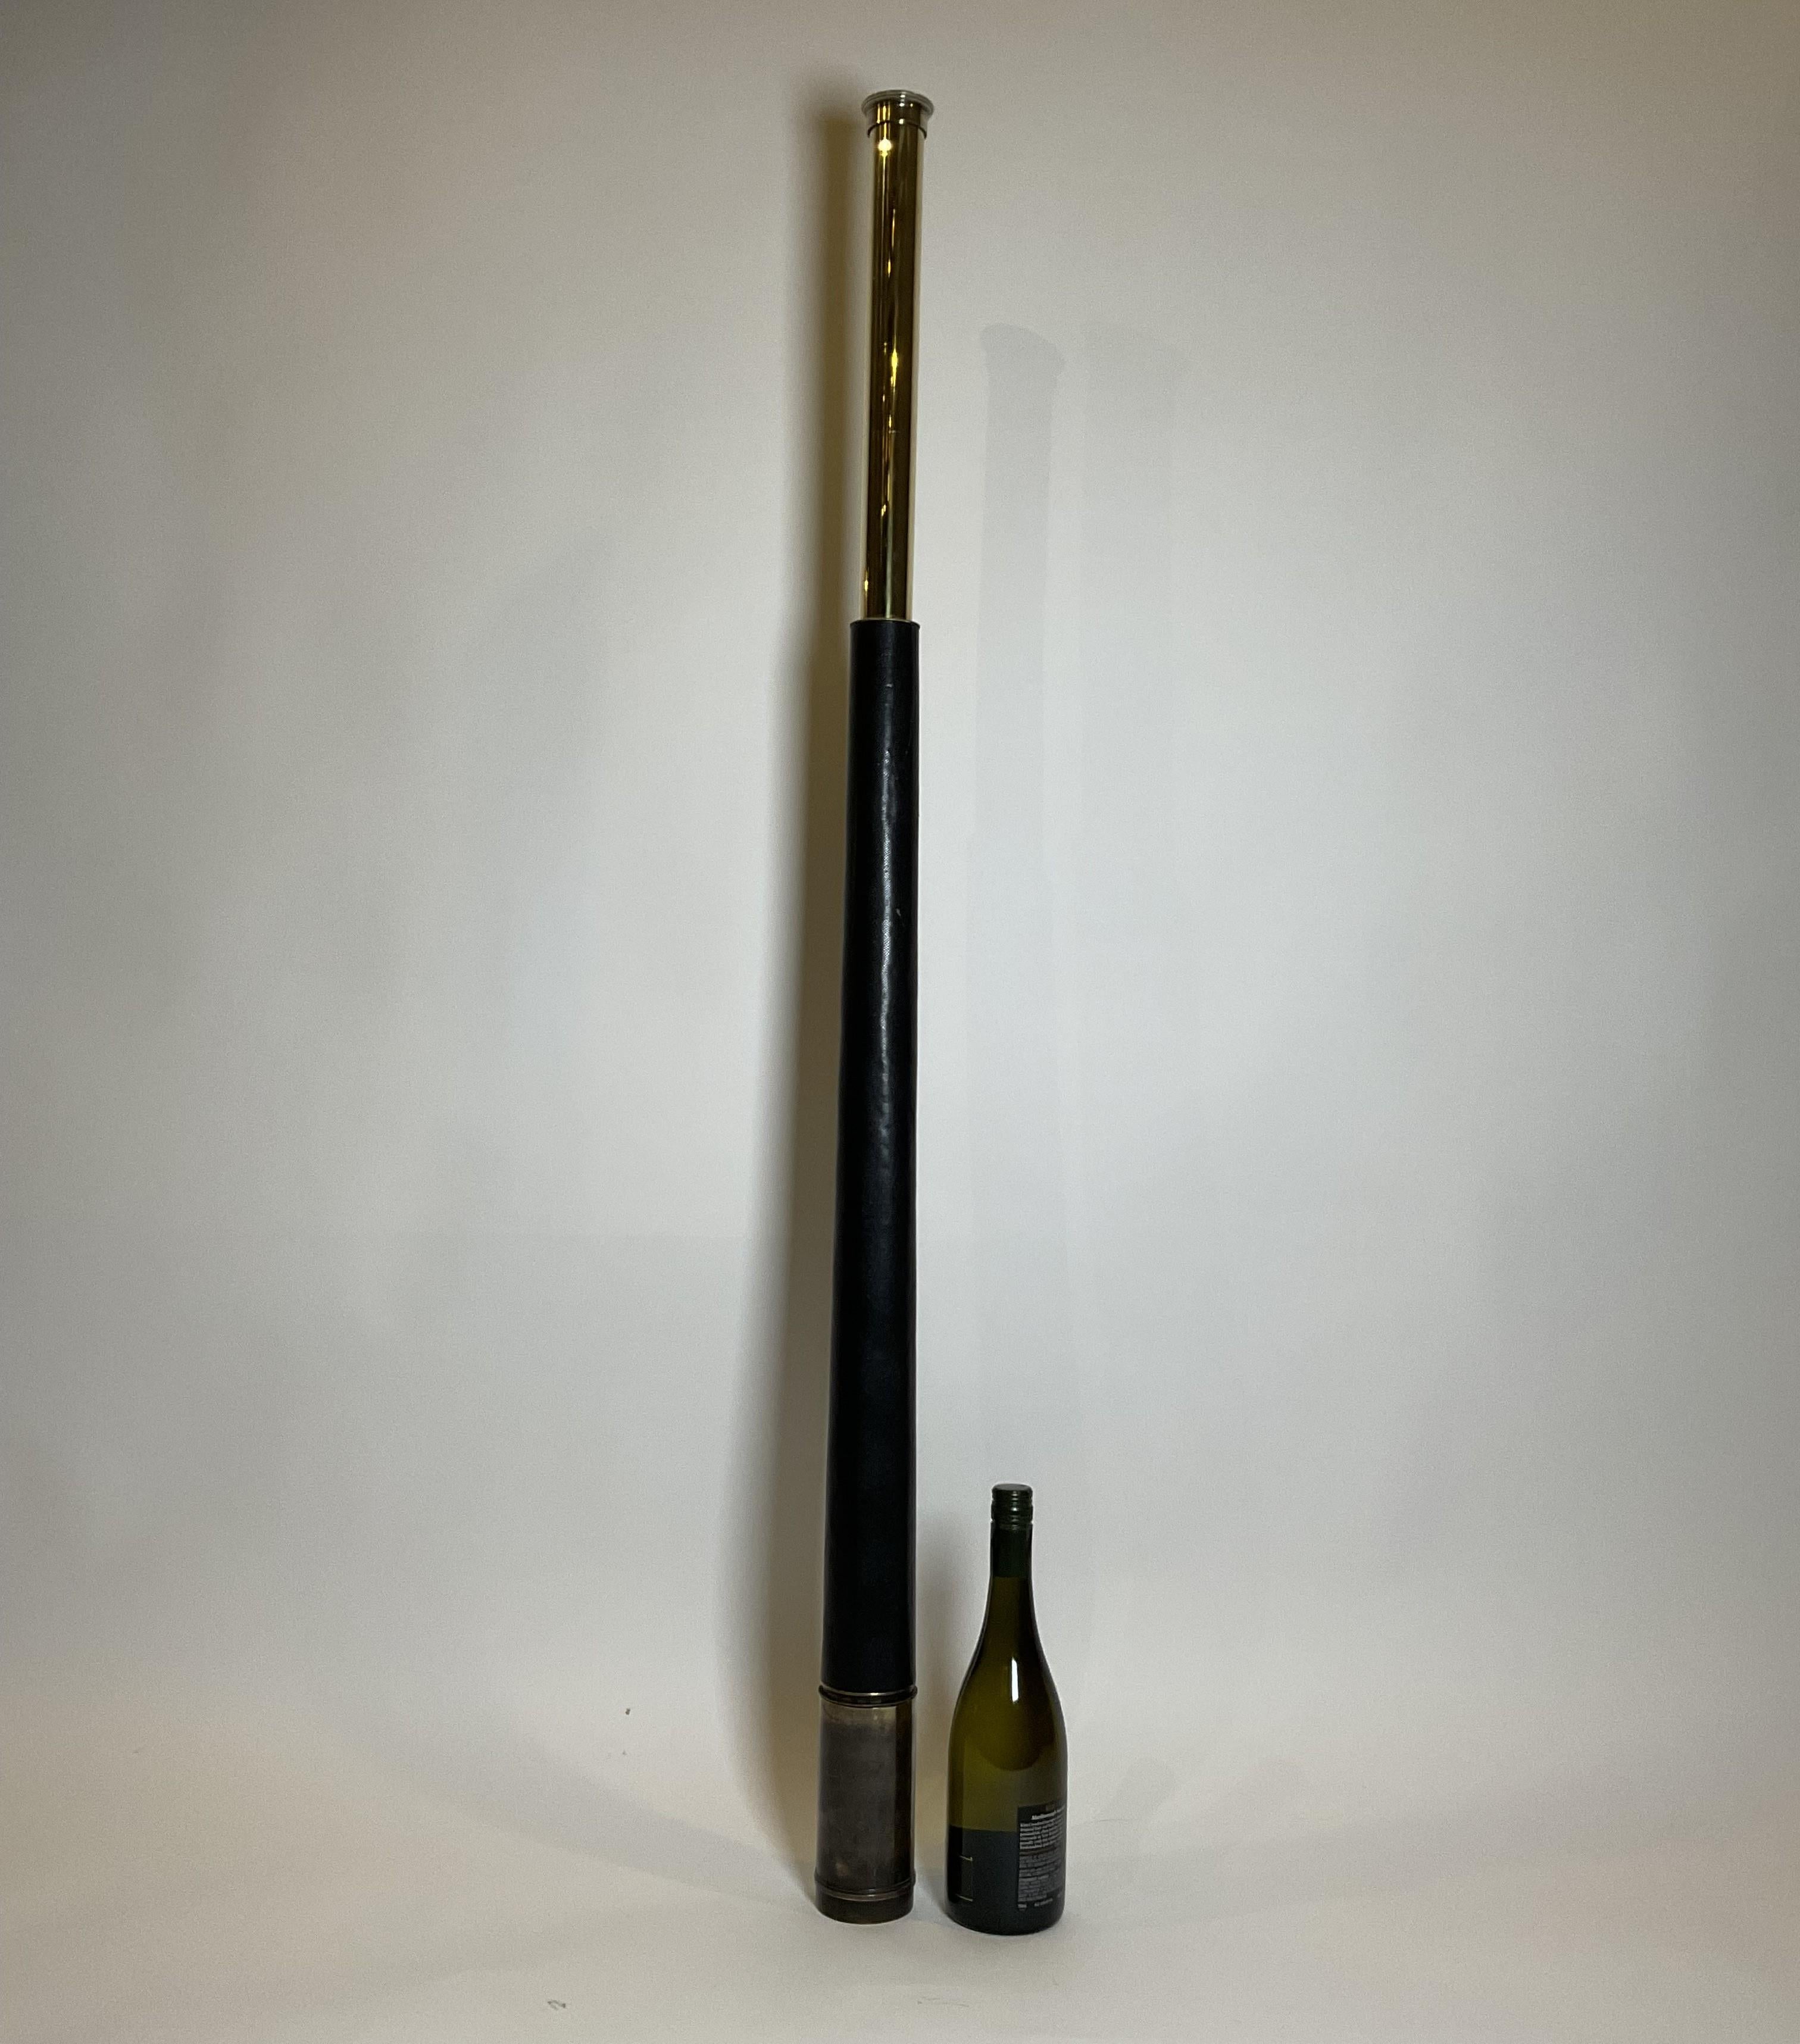 Antique telescope from Negretti and Zambra of London. The exceptionally long barrel is three feet closed and fifty two inches open. Black cover. Great optics.

Weight: 5 lbs.
Overall Dimensions: 51